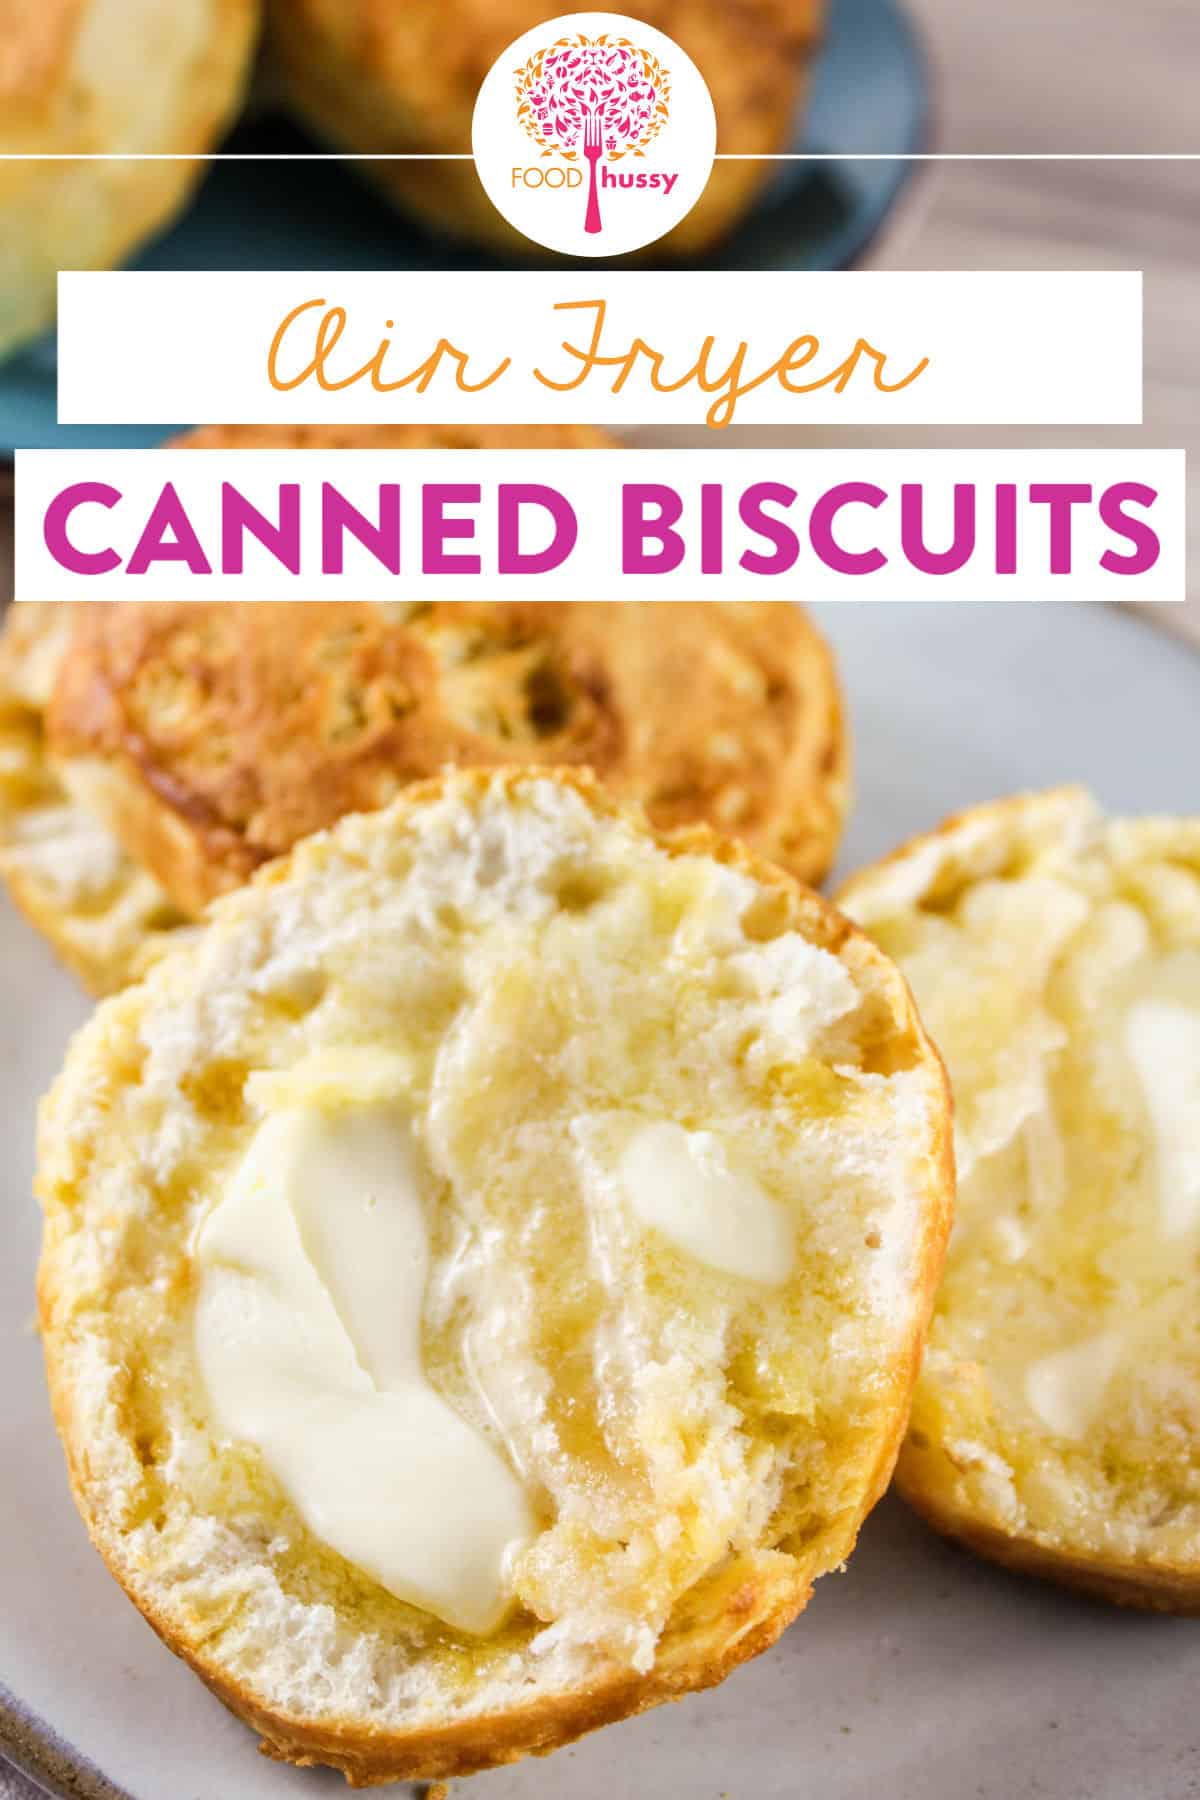 Lots of folks ask me if you can air fry canned biscuits? The answer is a resounding YES! Refrigerated biscuits are a great side dish for any meal and making them in the air fryer saves time (and is great for reheating as well!).  via @foodhussy